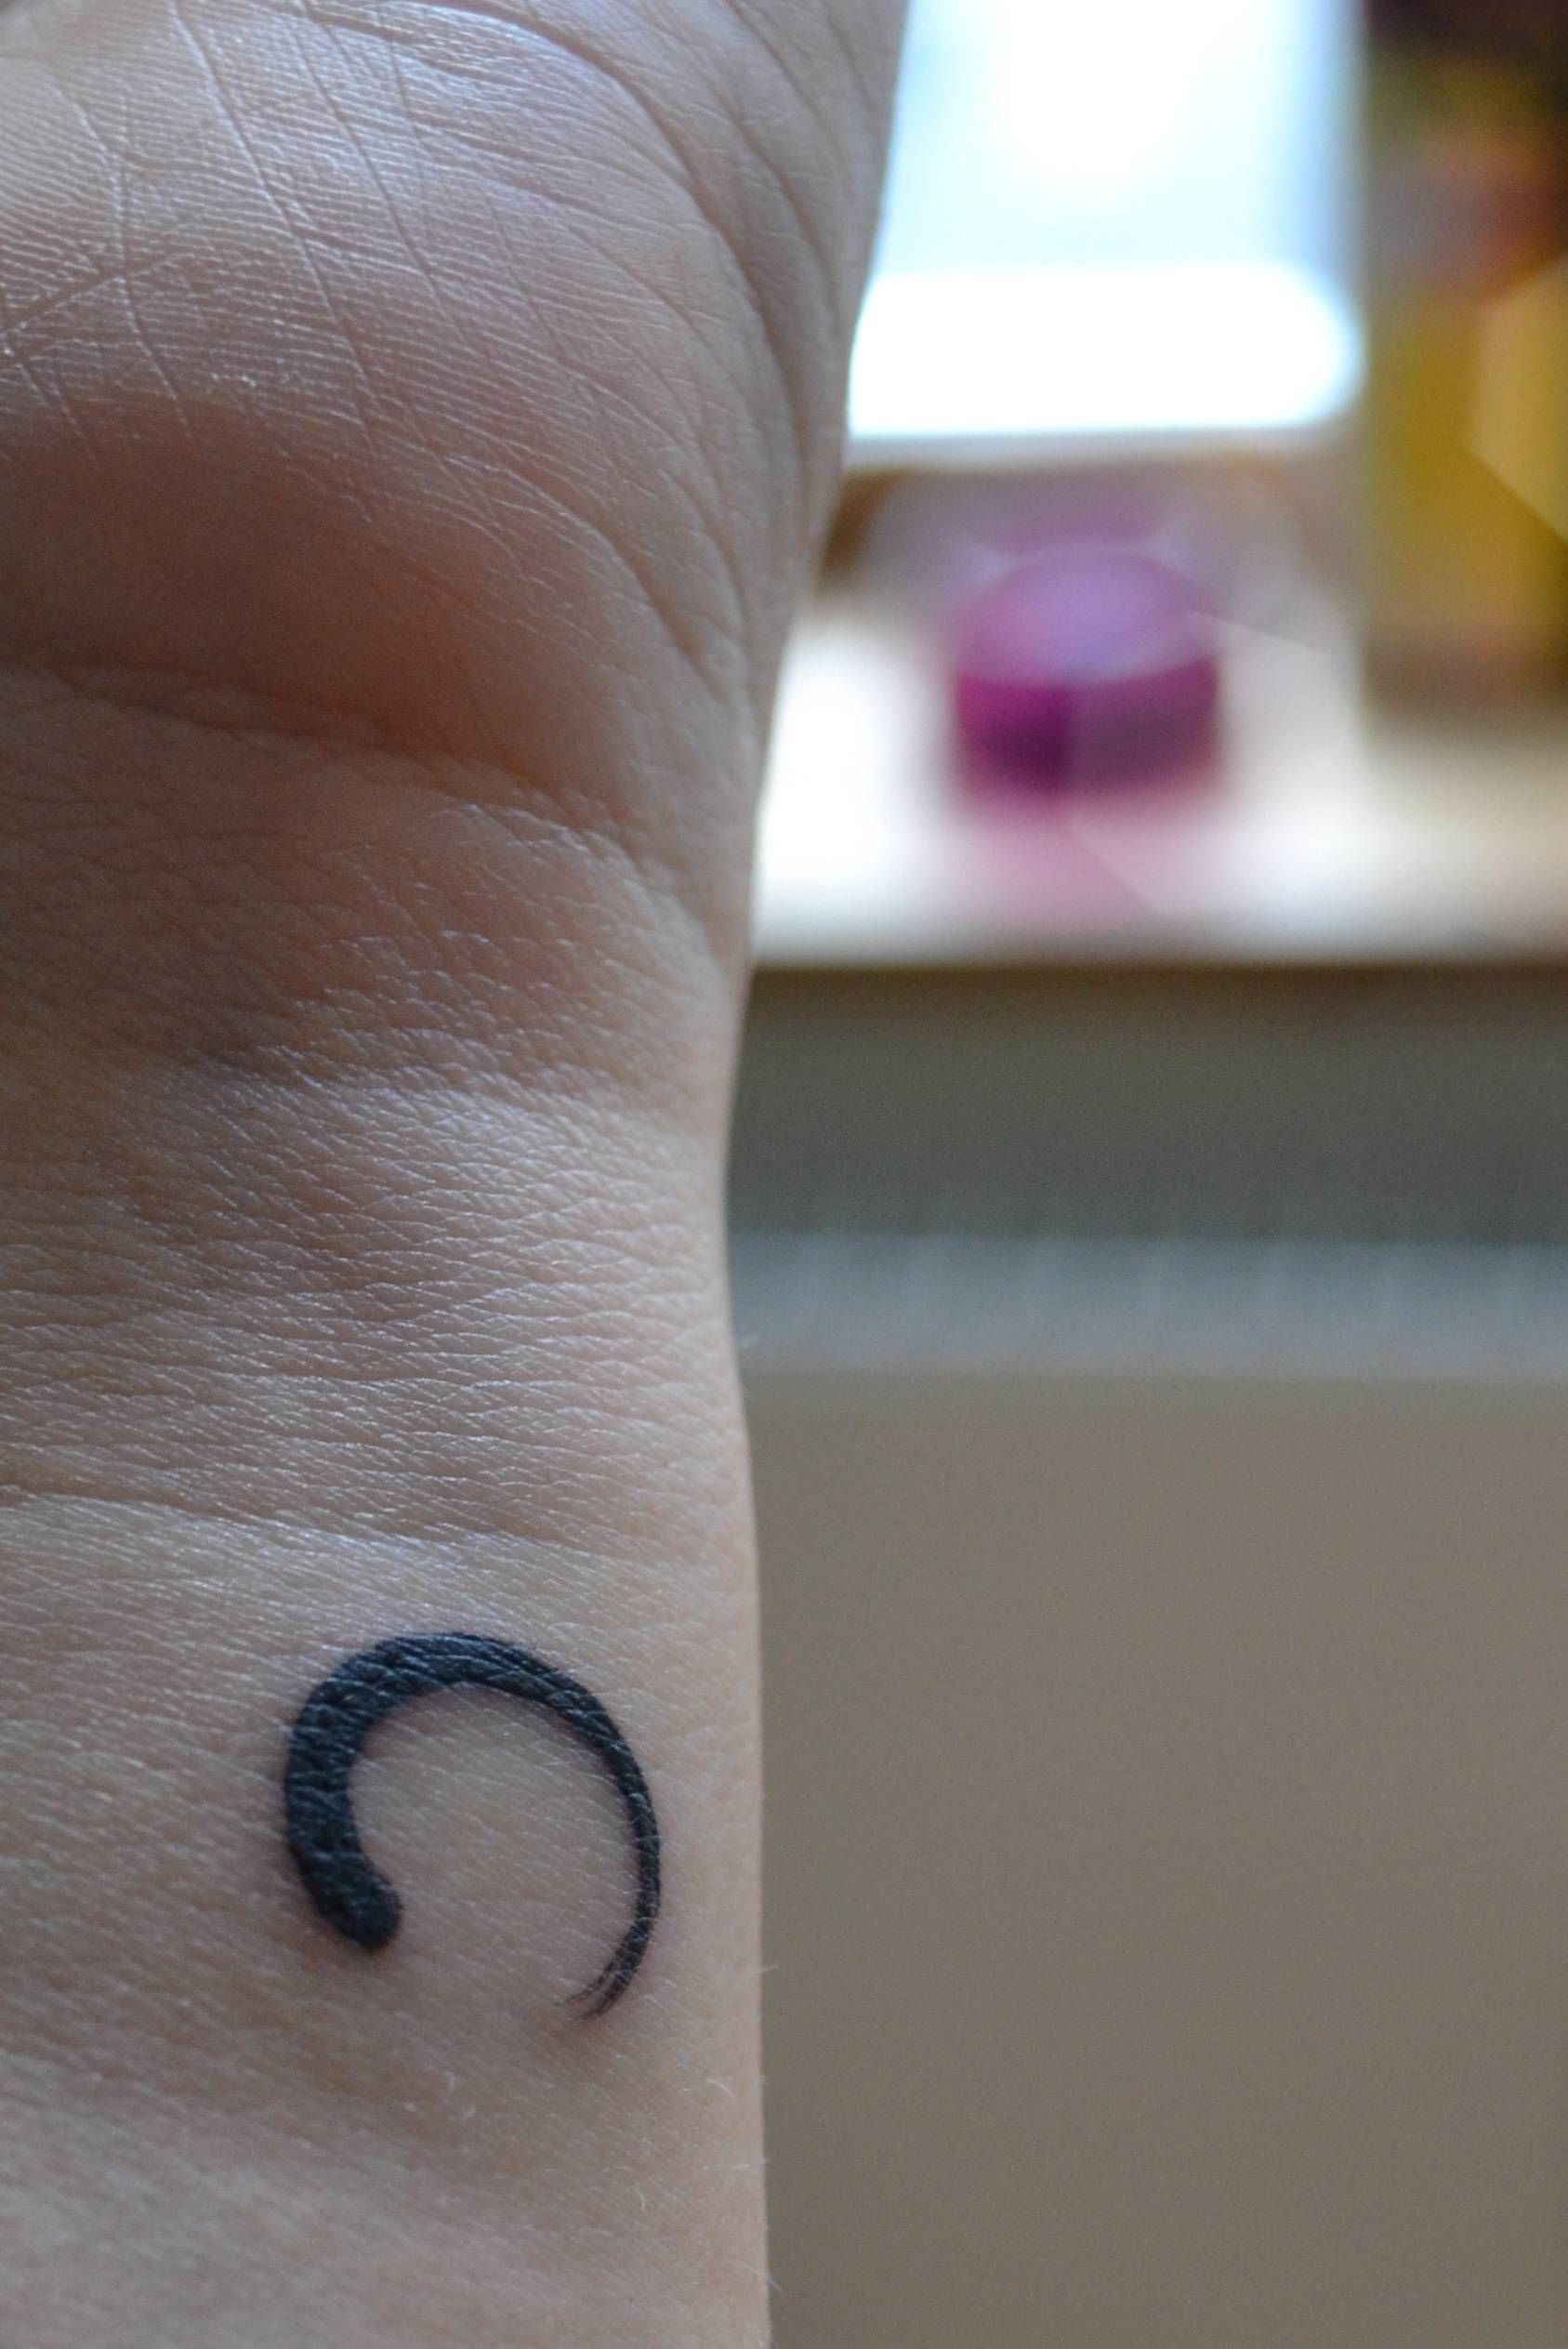 This would be cool on my other wrist! The zen (or ens) circle to me represents enlightenment, the universe & the strength we all have inside of